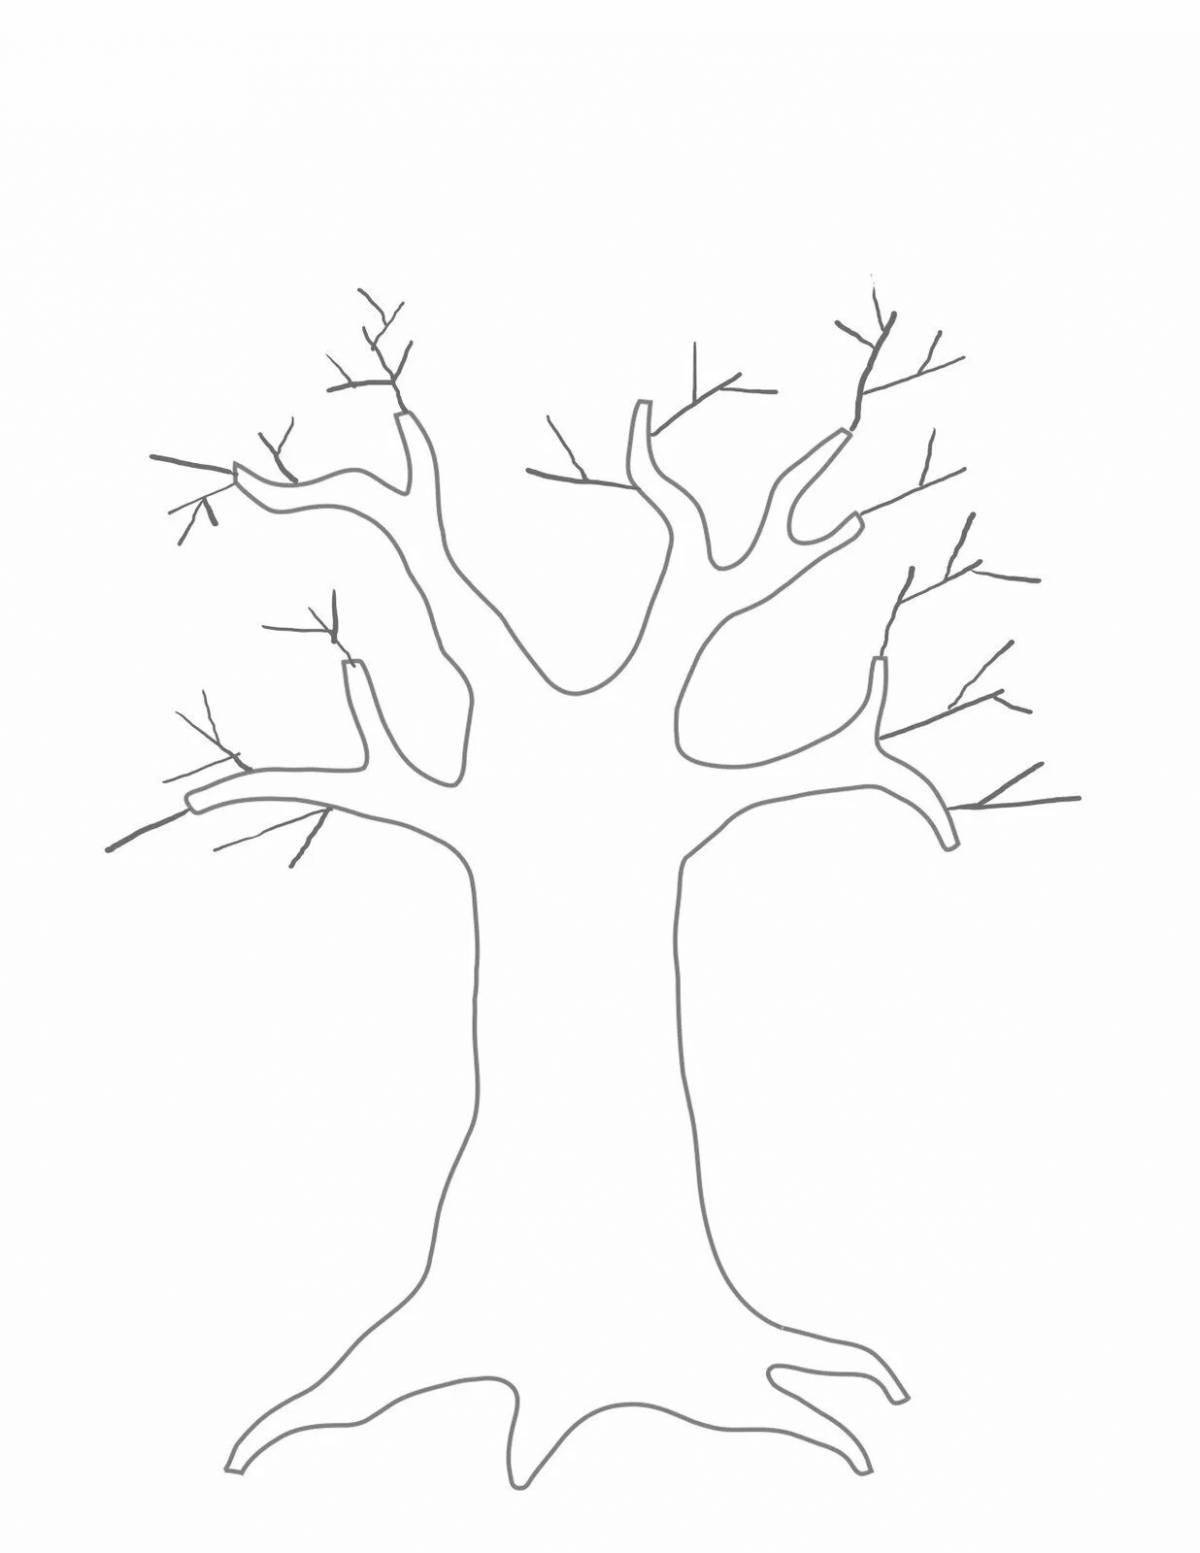 Animated tree trunk coloring page for toddlers